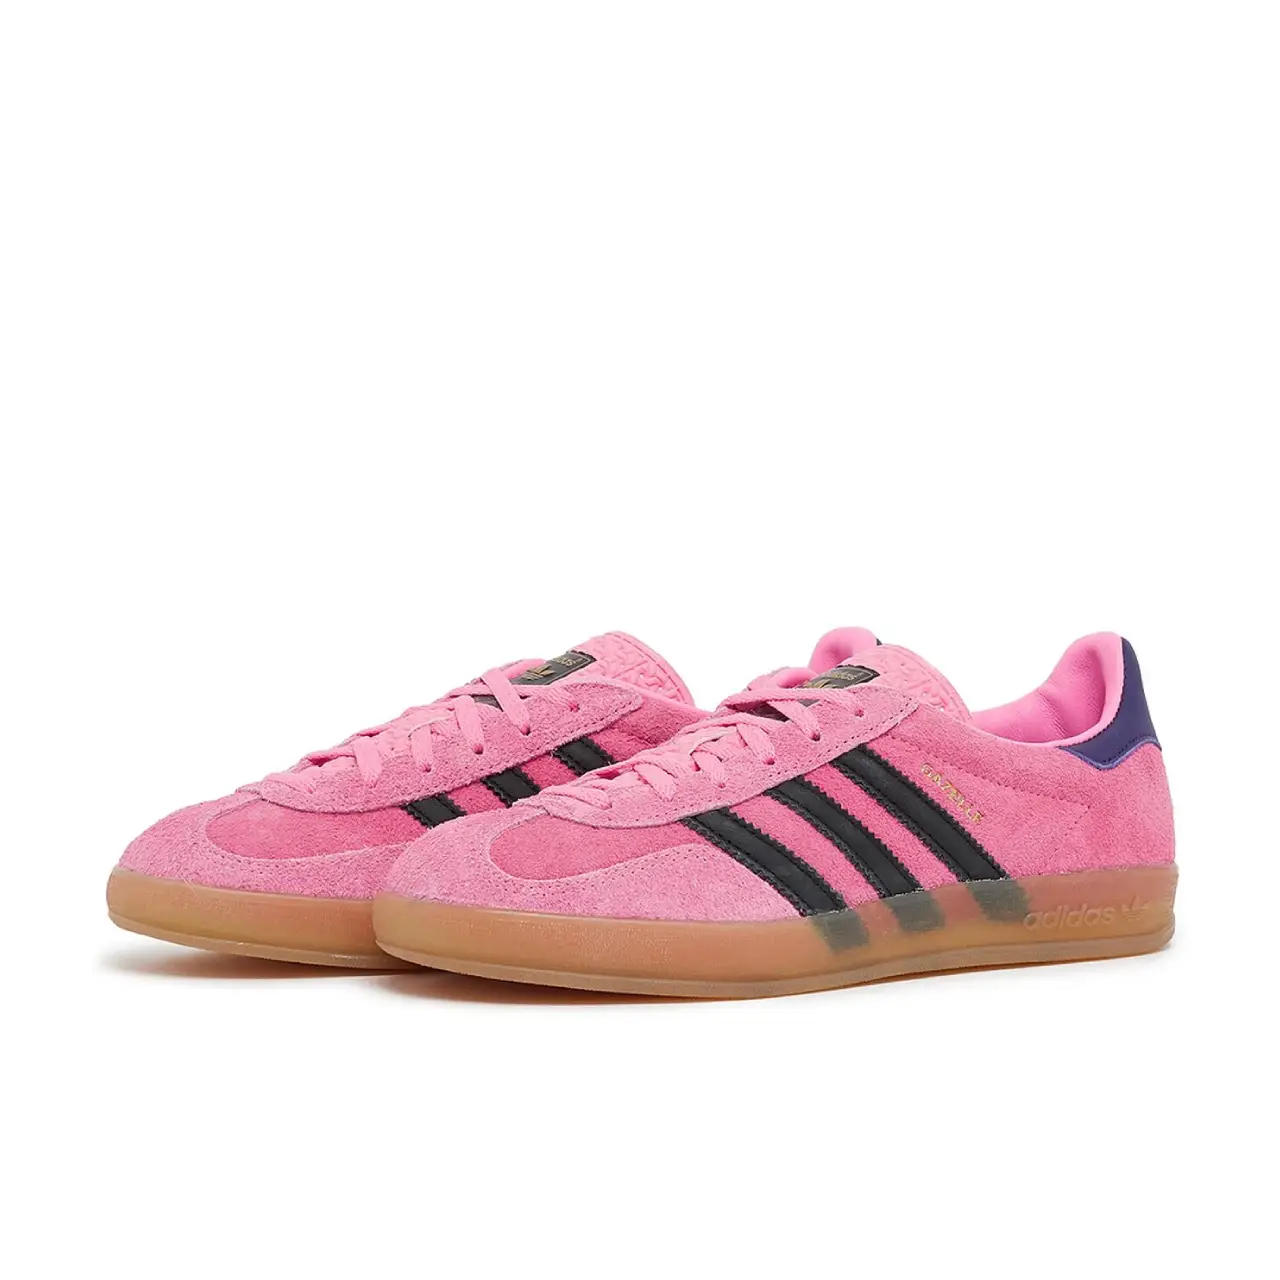 AU.SELL, Put some spring into your step 🌸 The adidas Gazelle “Bliss Pink  Purple” 🤩 Tap the Image to Shop 🛍